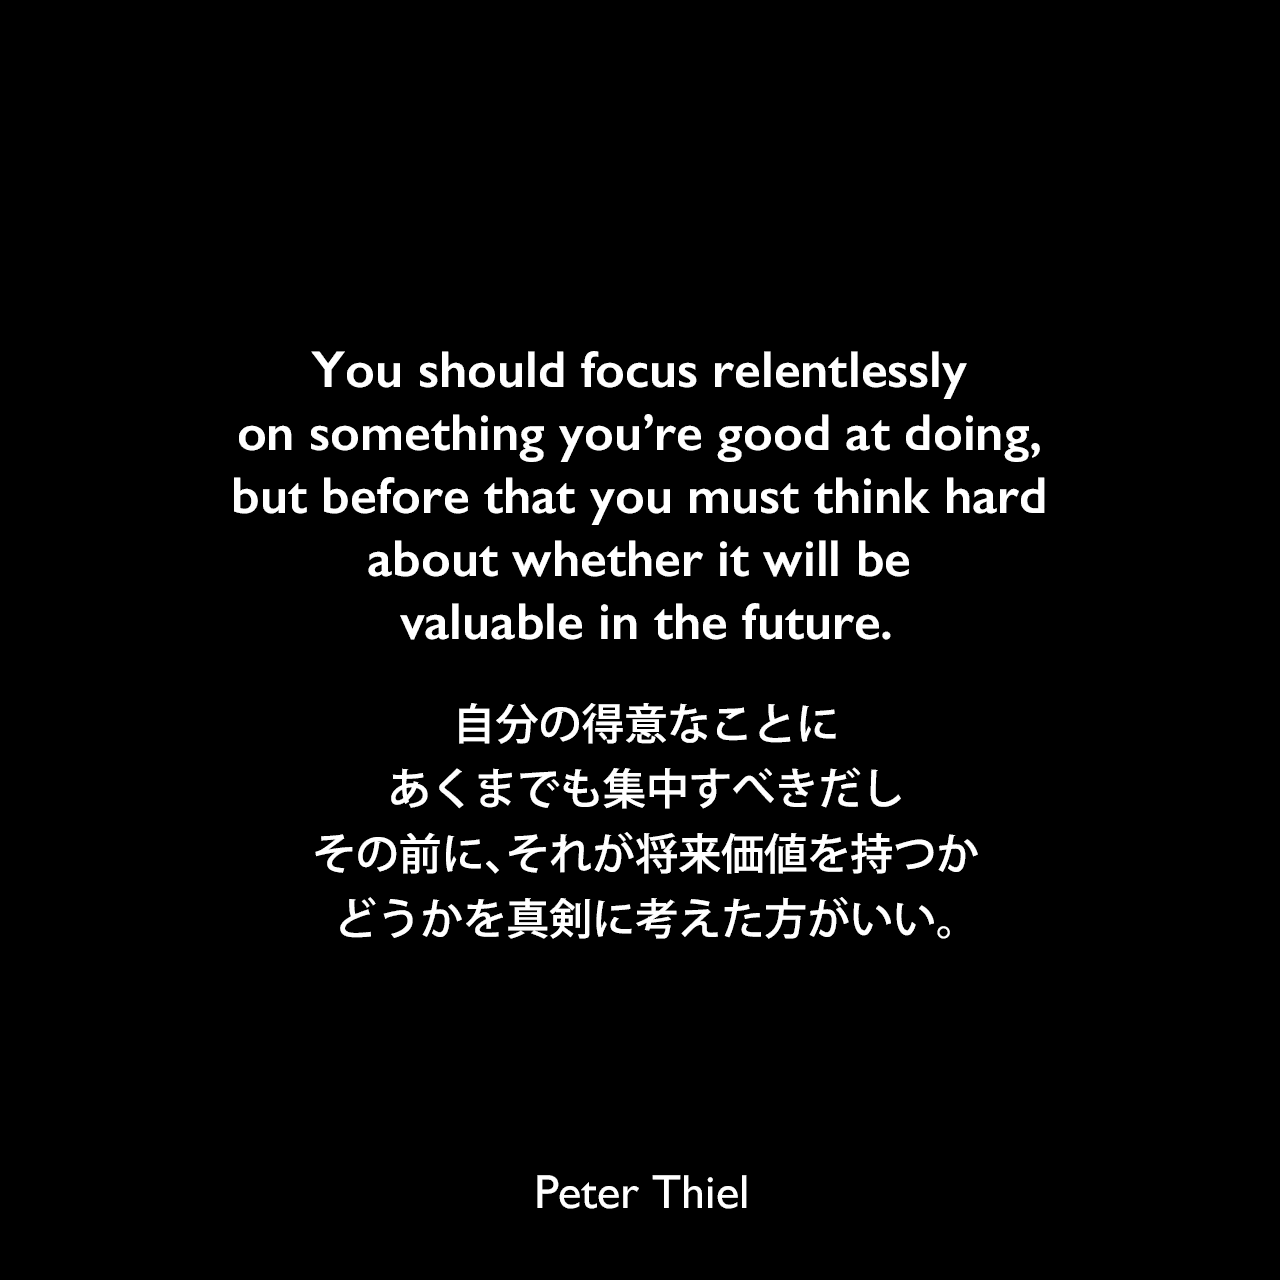 You should focus relentlessly on something you’re good at doing, but before that you must think hard about whether it will be valuable in the future.自分の得意なことにあくまでも集中すべきだし、その前に、それが将来価値を持つかどうかを真剣に考えた方がいい。- ピーター・ティールの本「Zero to One」よりPeter Thiel